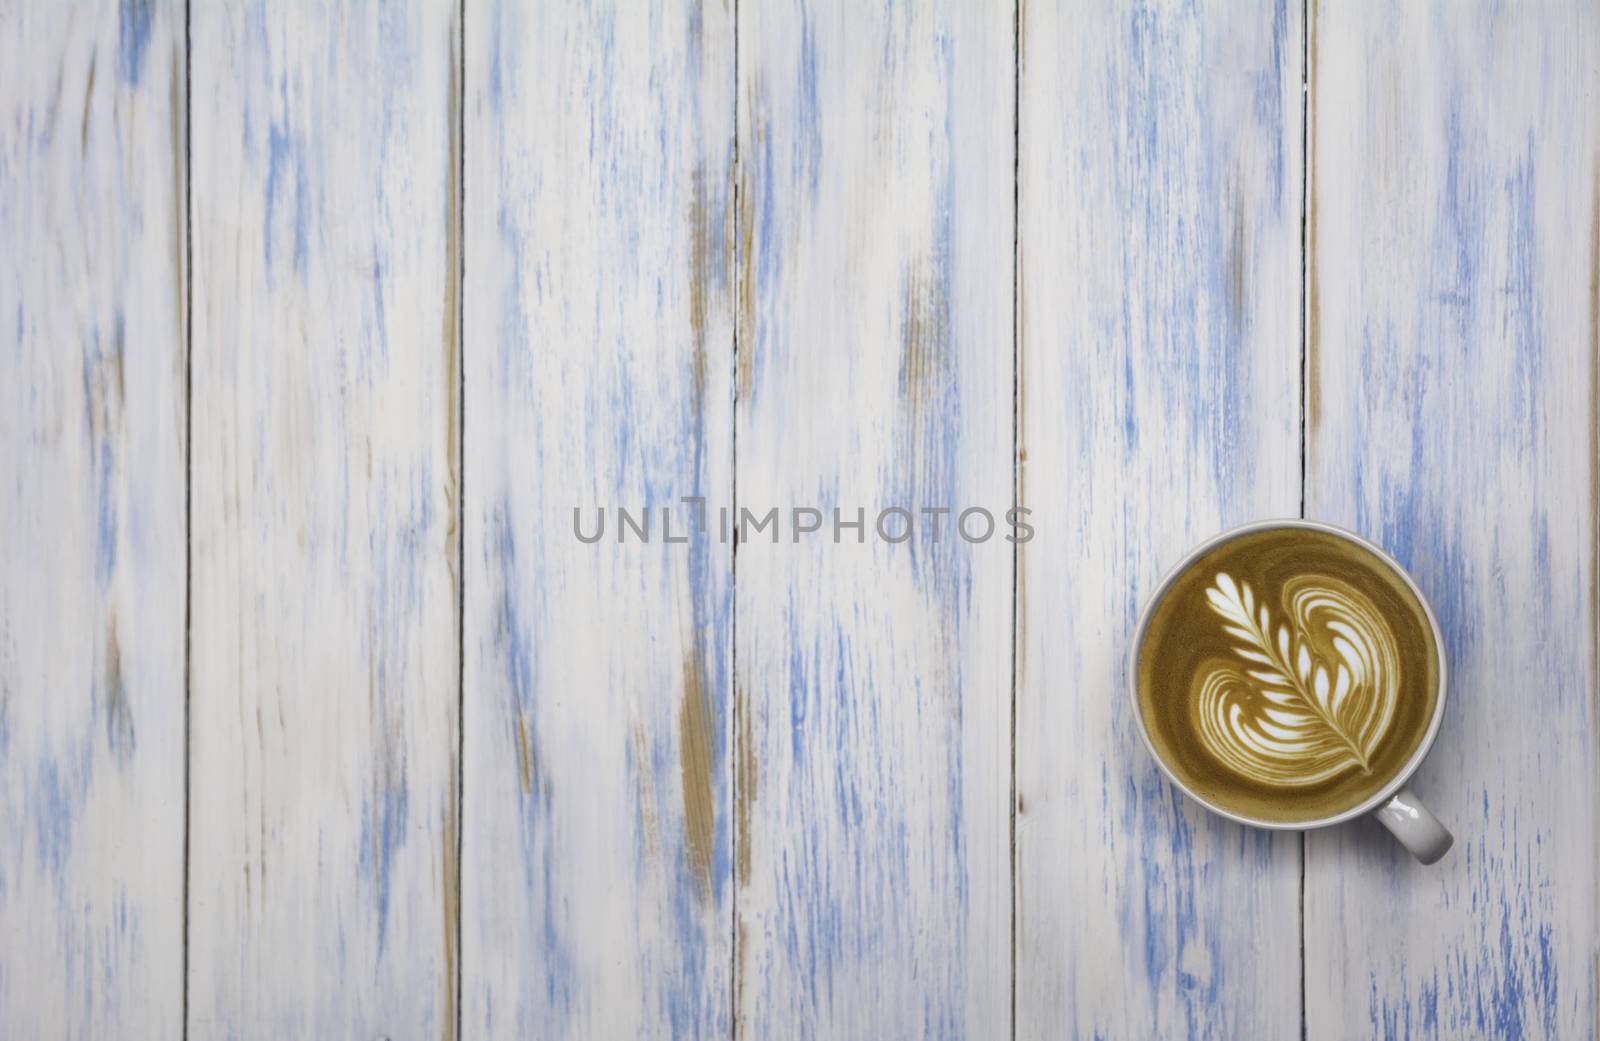 A cup of coffee on wooden table. Top view of coffee latte art with copy space. Drink and art concept.